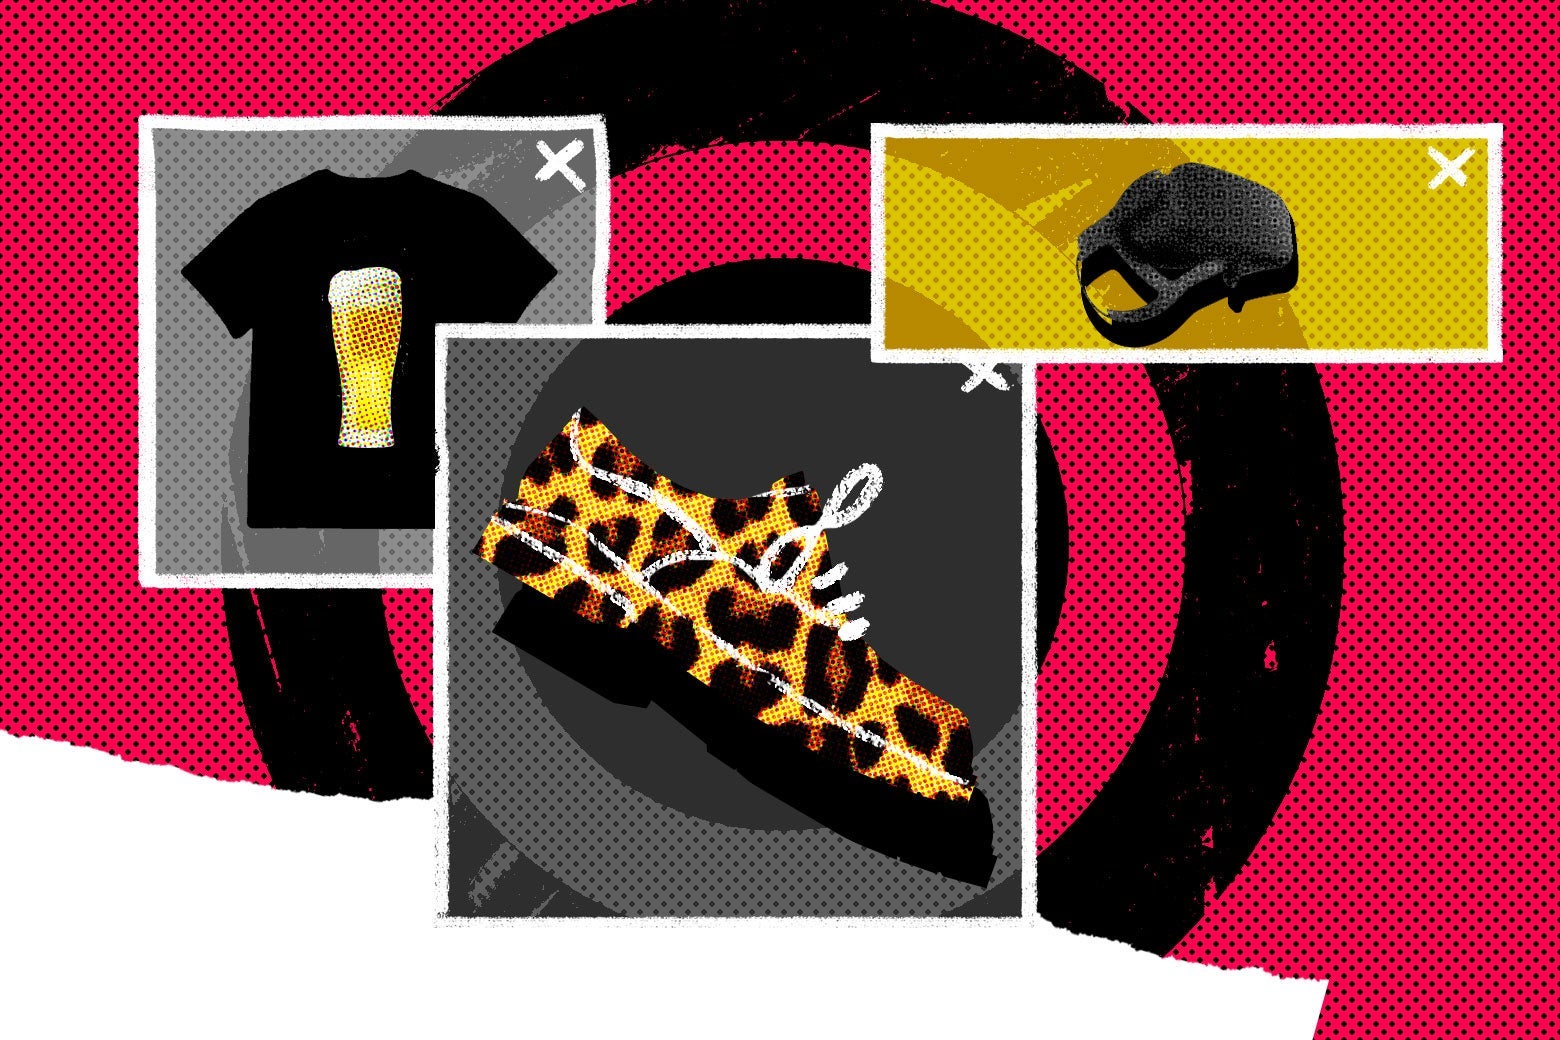 Photo illustration of pop-up ad images: a T-shirt with beer, leopard-print shoes, and a leash?